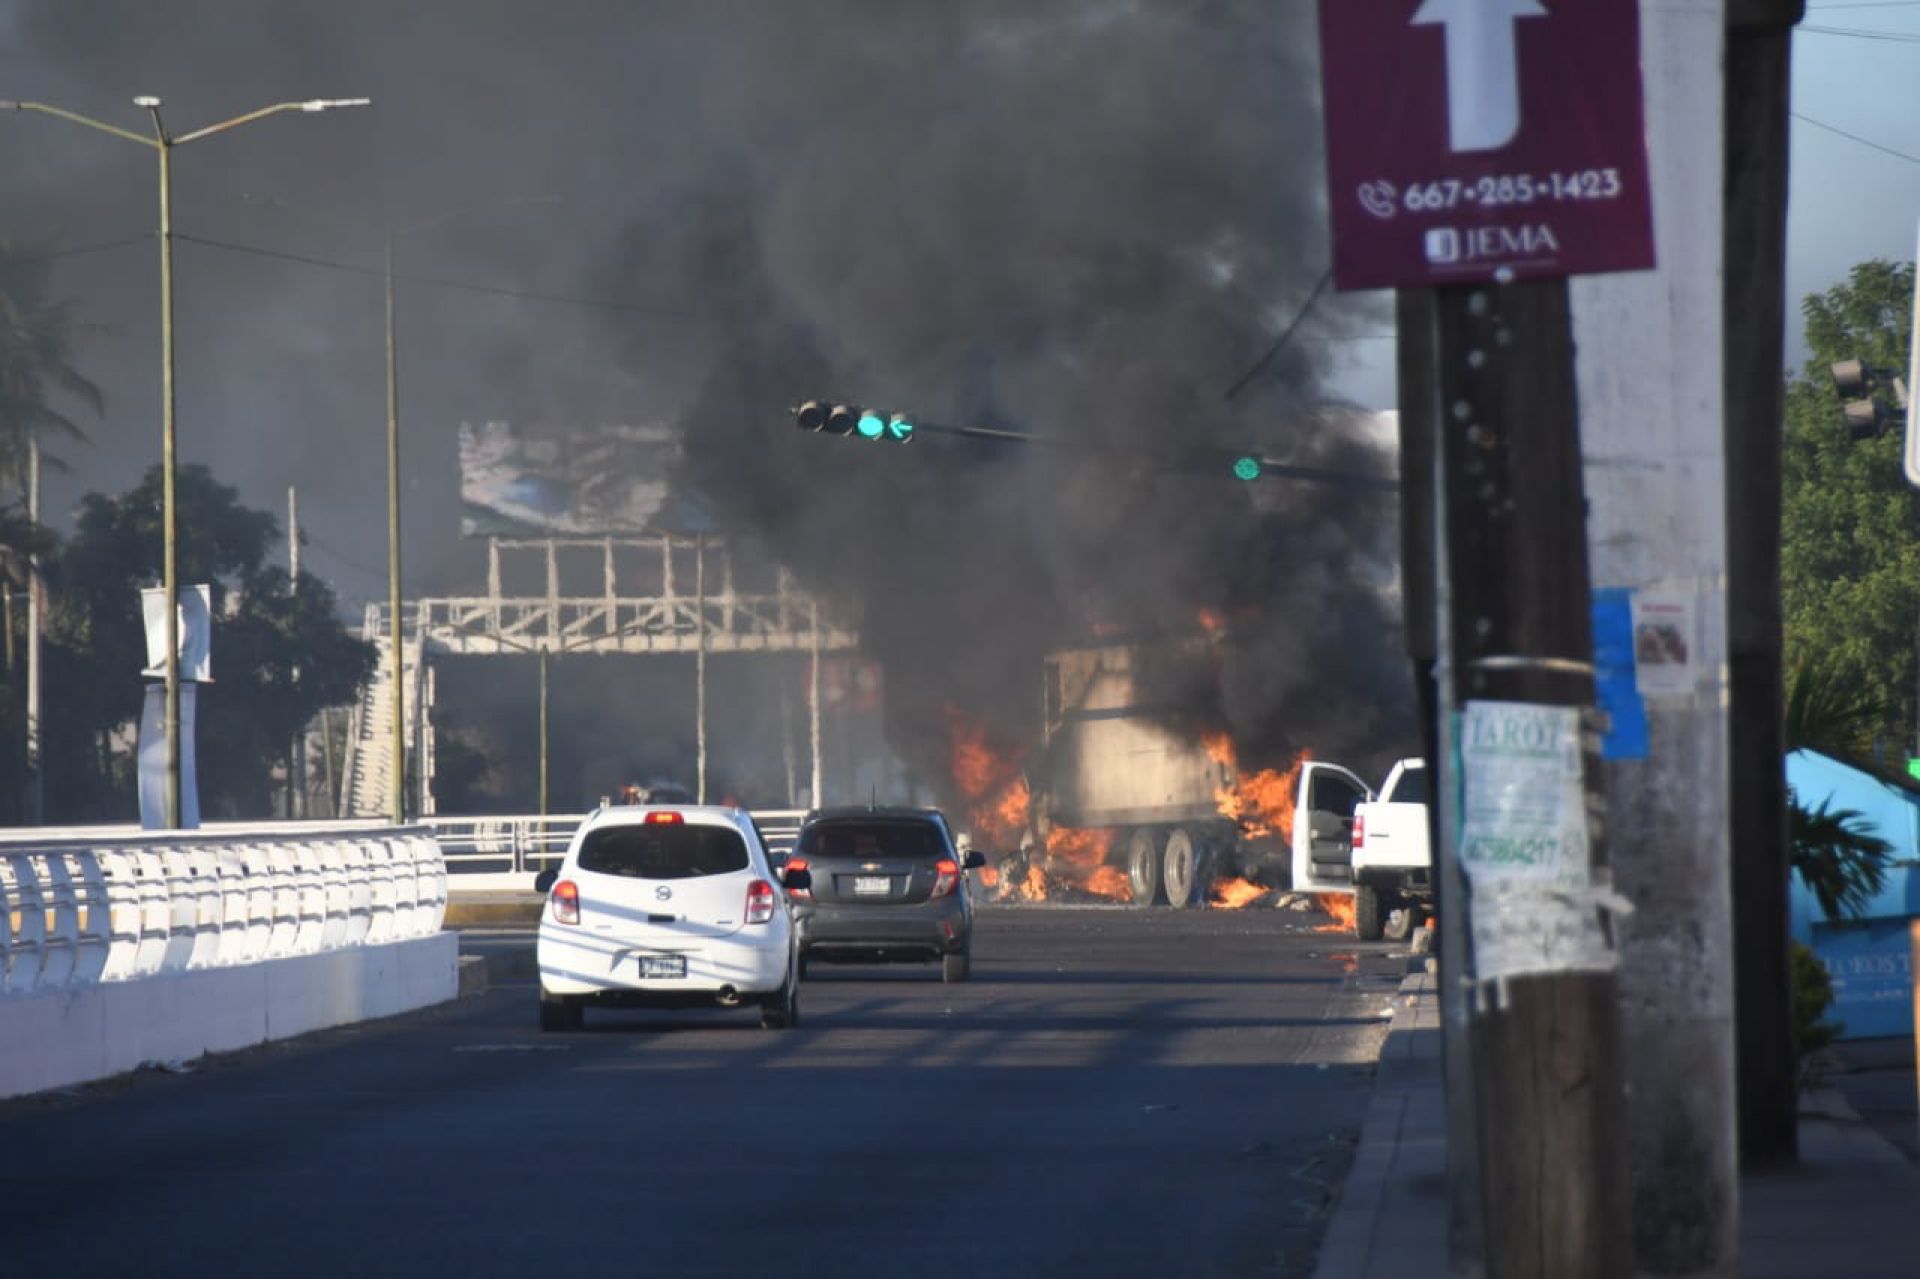 Article 19 called for guaranteeing the safety of the press after reported attacks in Sinaloa.  PHOTO: LEO ESPINOZA AND ALEJANDRO ESCOBAR/CUARTOSCURO.COM